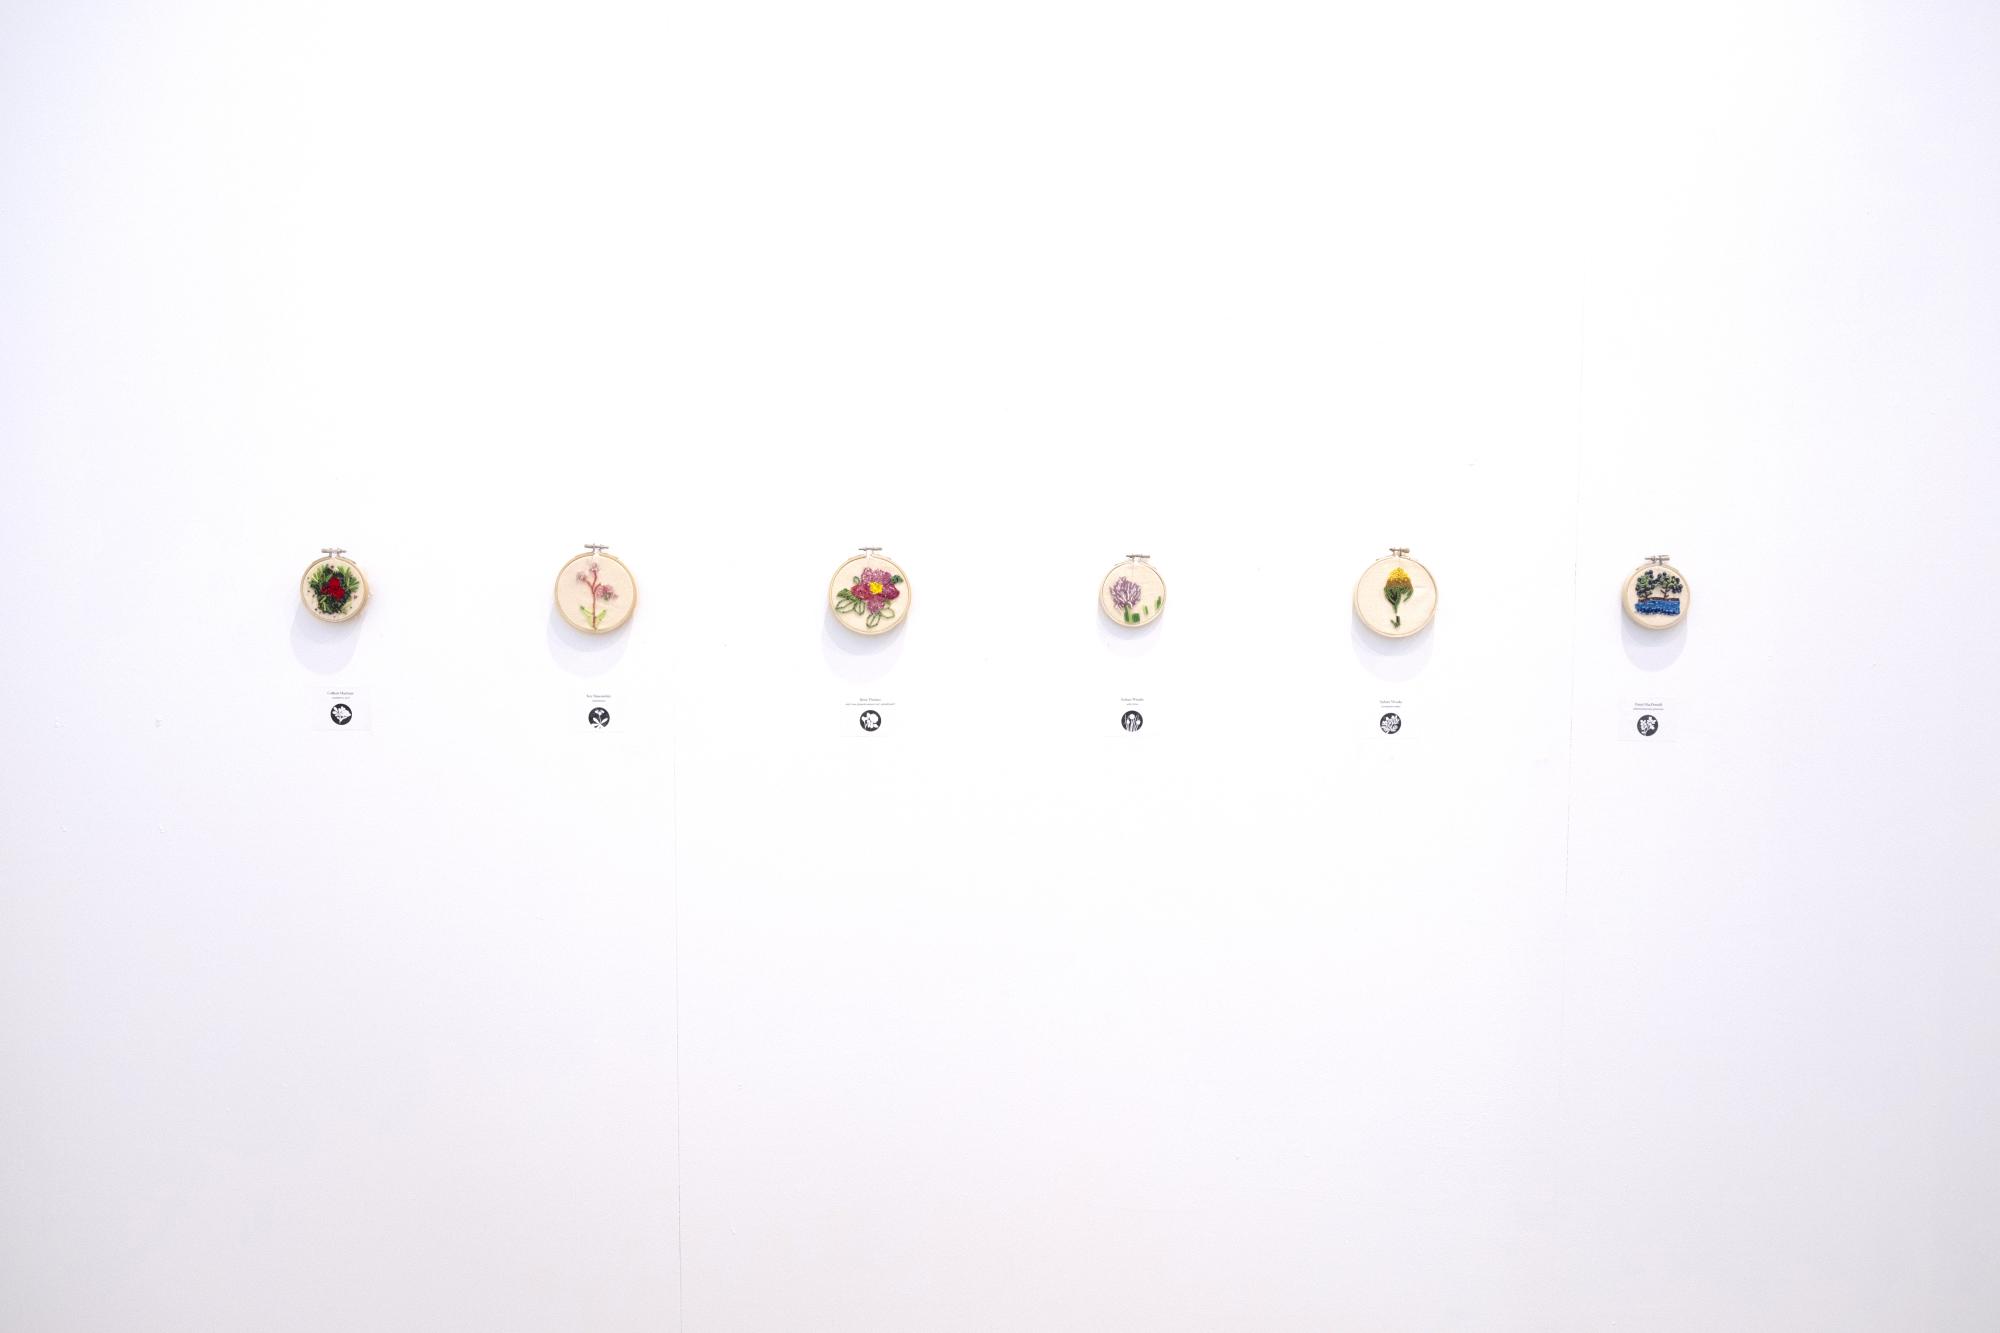 6 beaded pieces mounted in embroidery hoops hang on a white wall. They depict various plants and flowers